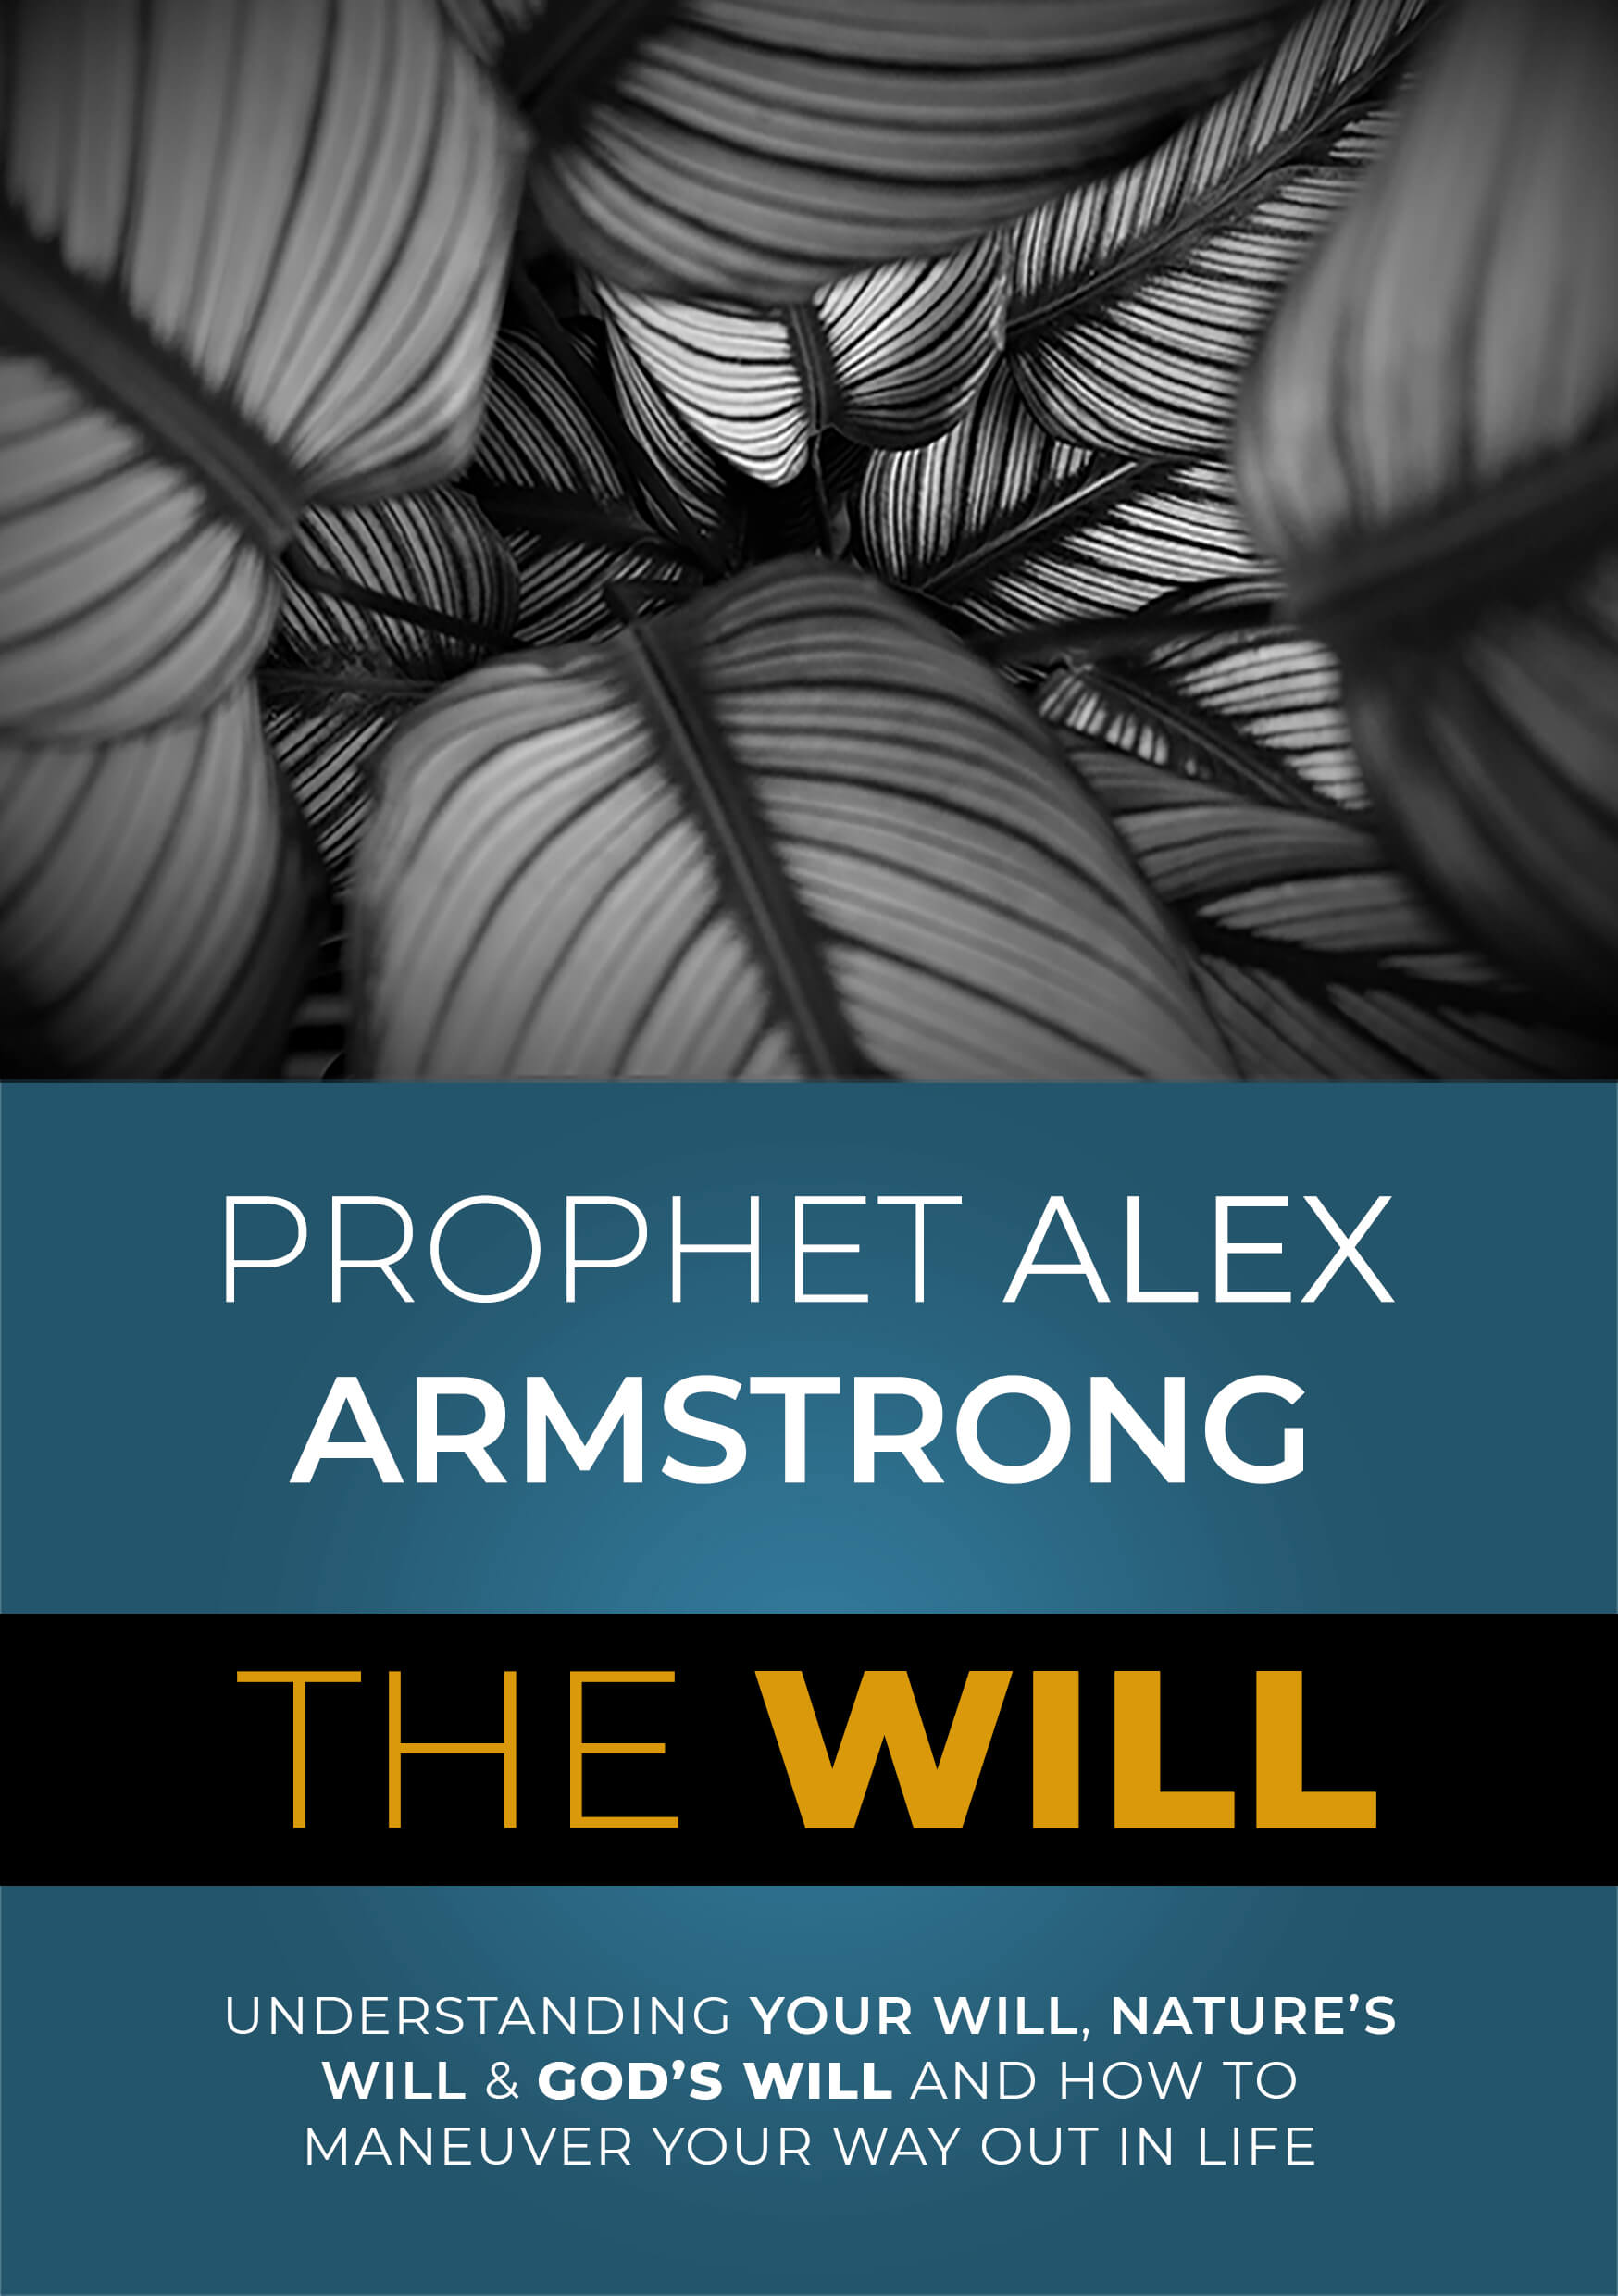 The Will, a book by Prophet Alex Armstrong